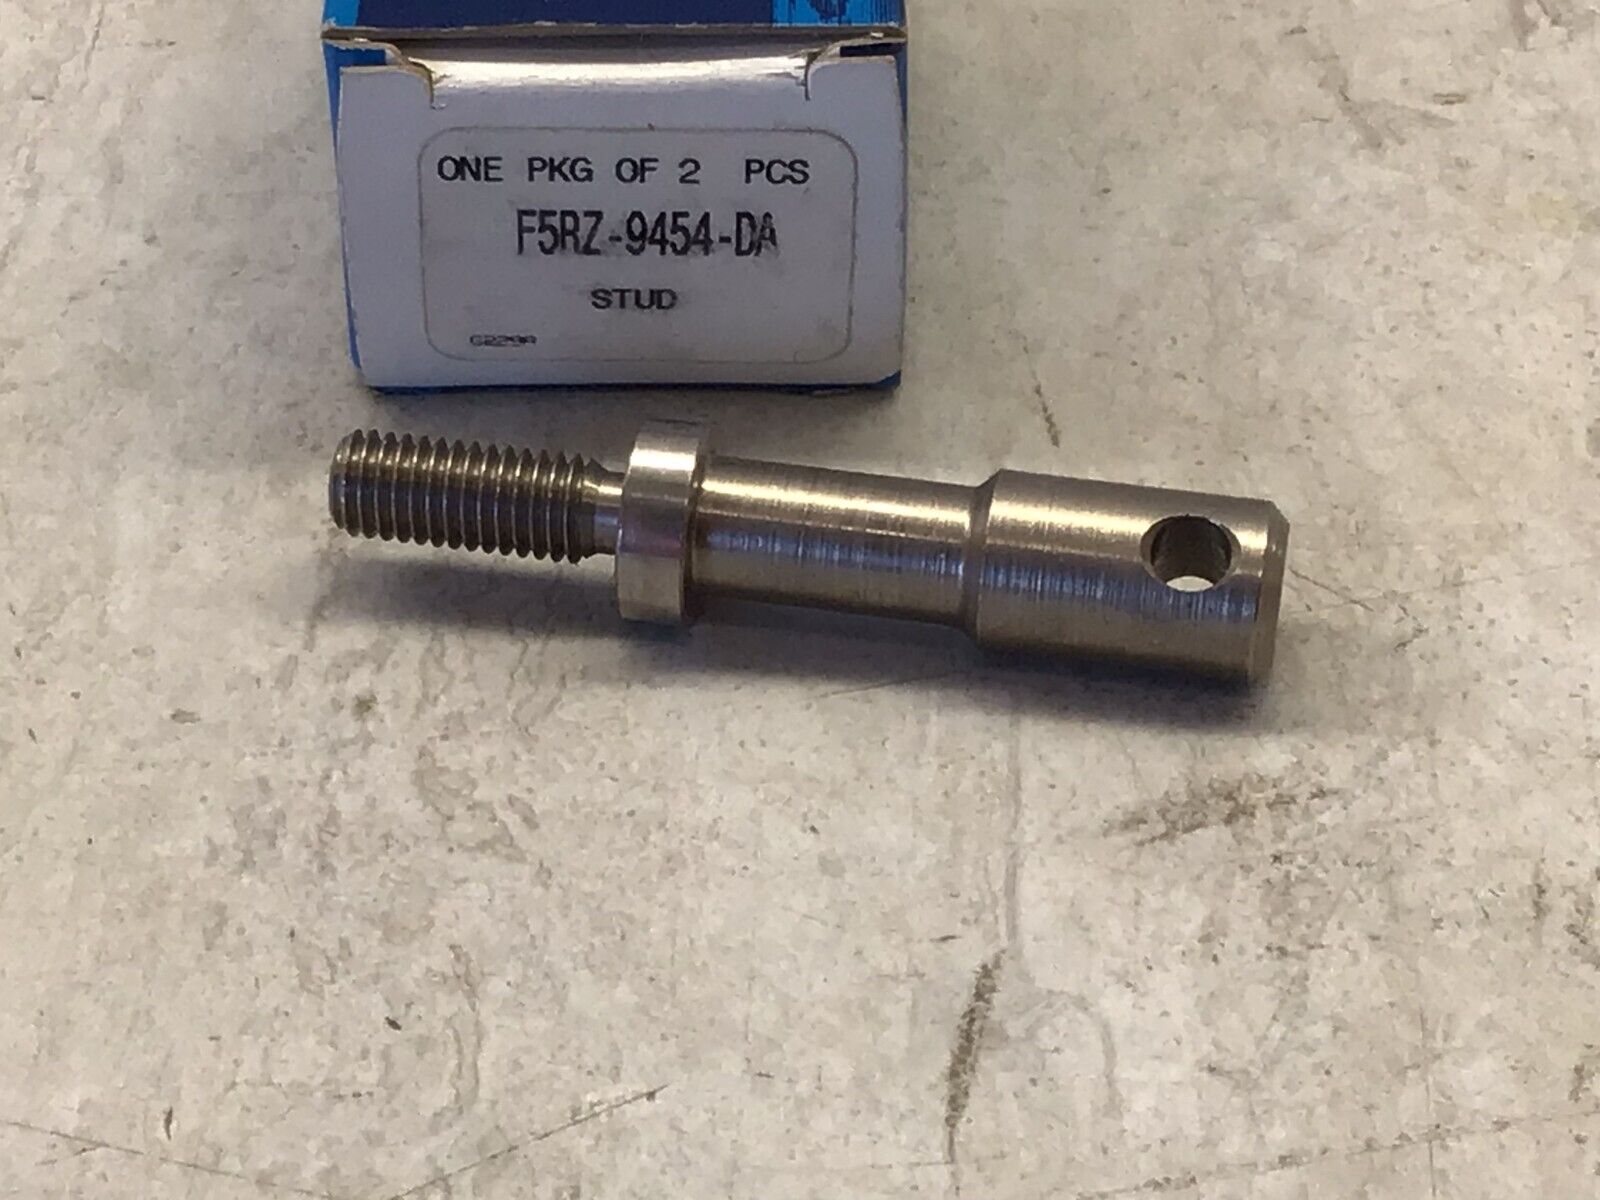 Exhaust Bolt And Spring - Ford F5RZ-9454-DA